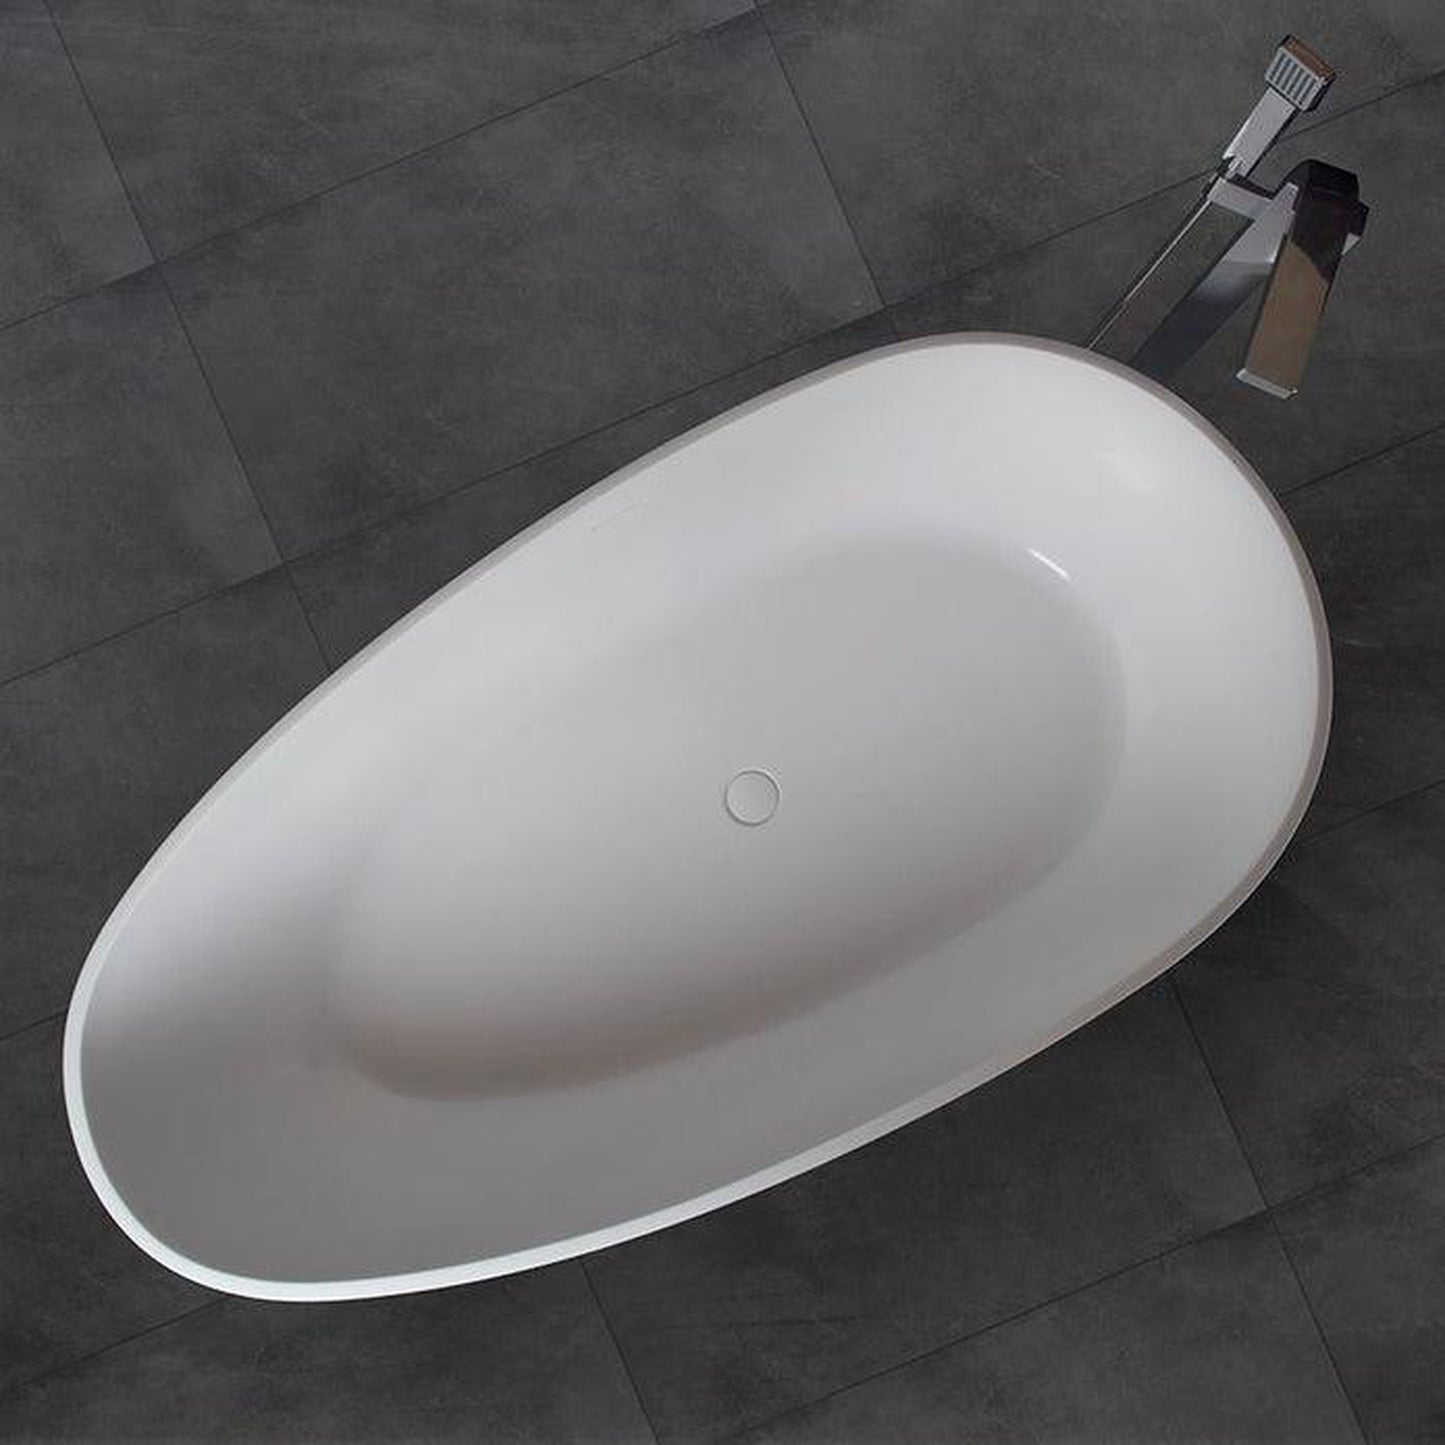 Vanity Art 67" Glossy White Contemporary Design Soaking Tub With Overflow and Pop-up Drain